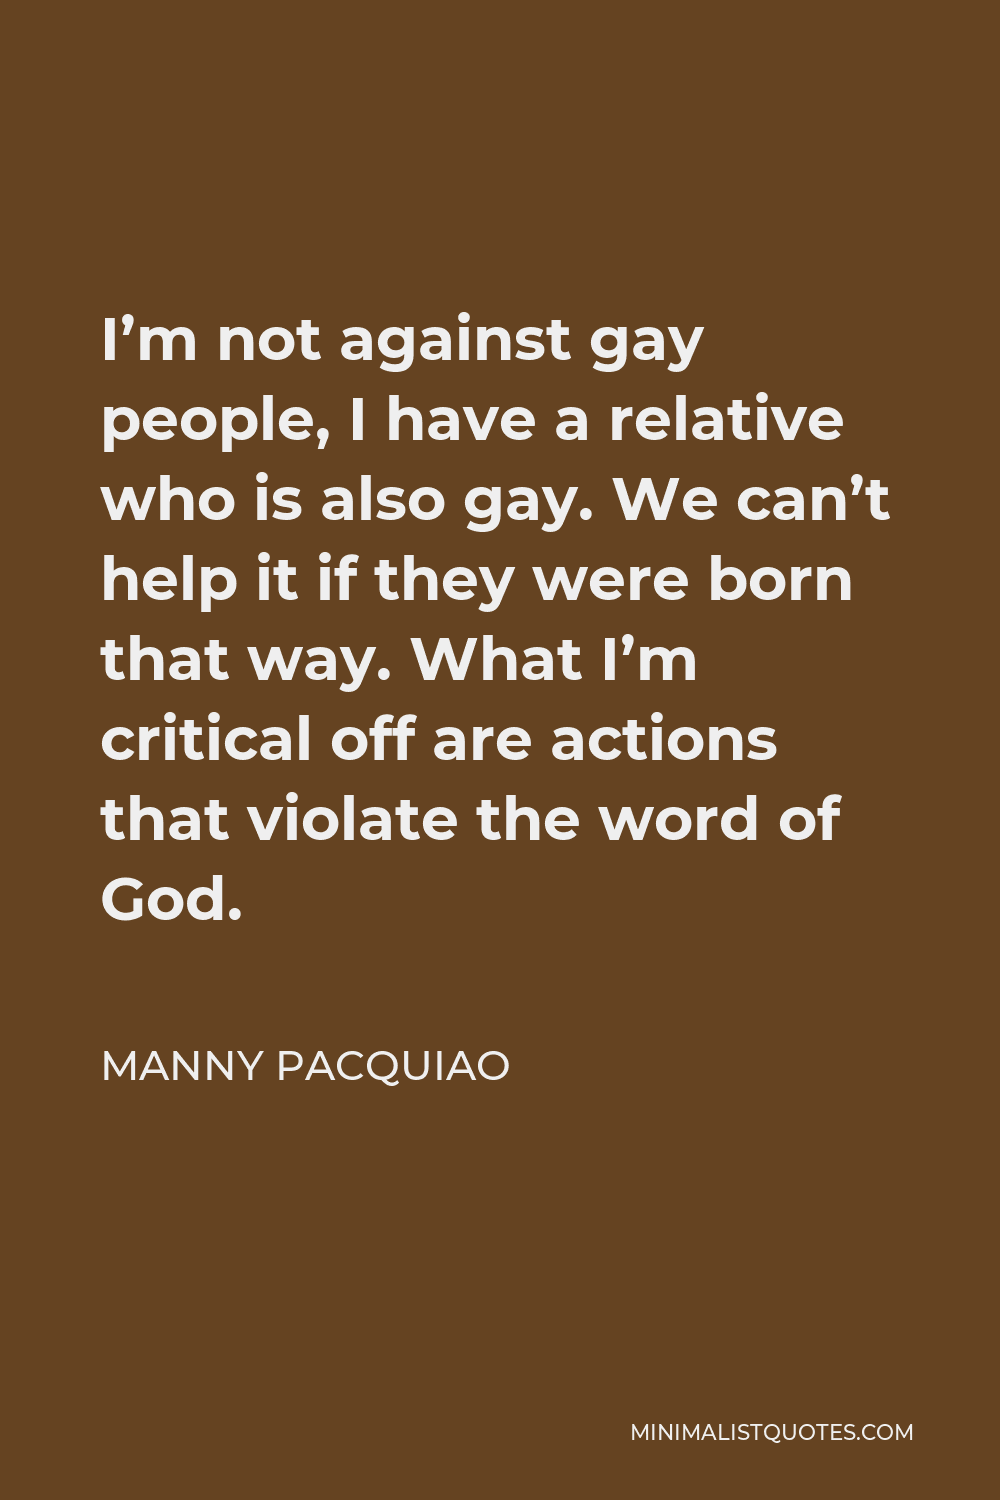 Manny Pacquiao Quote - I’m not against gay people, I have a relative who is also gay. We can’t help it if they were born that way. What I’m critical off are actions that violate the word of God.